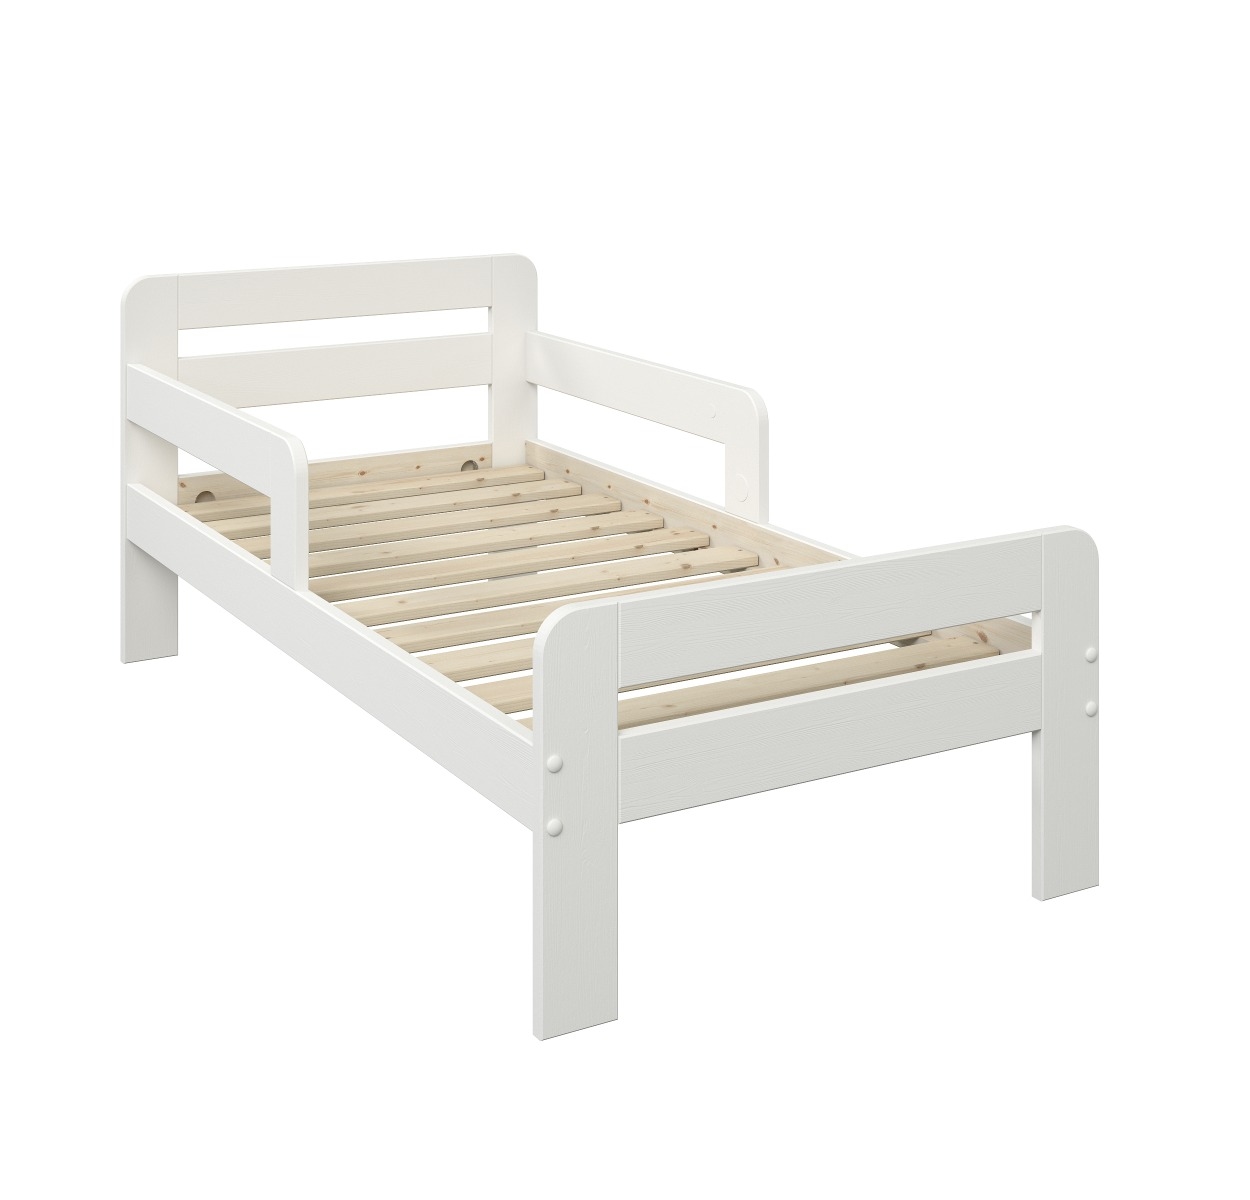 Noomi Wooden Toddler Bed With Side Rails White (FSC-Certifie